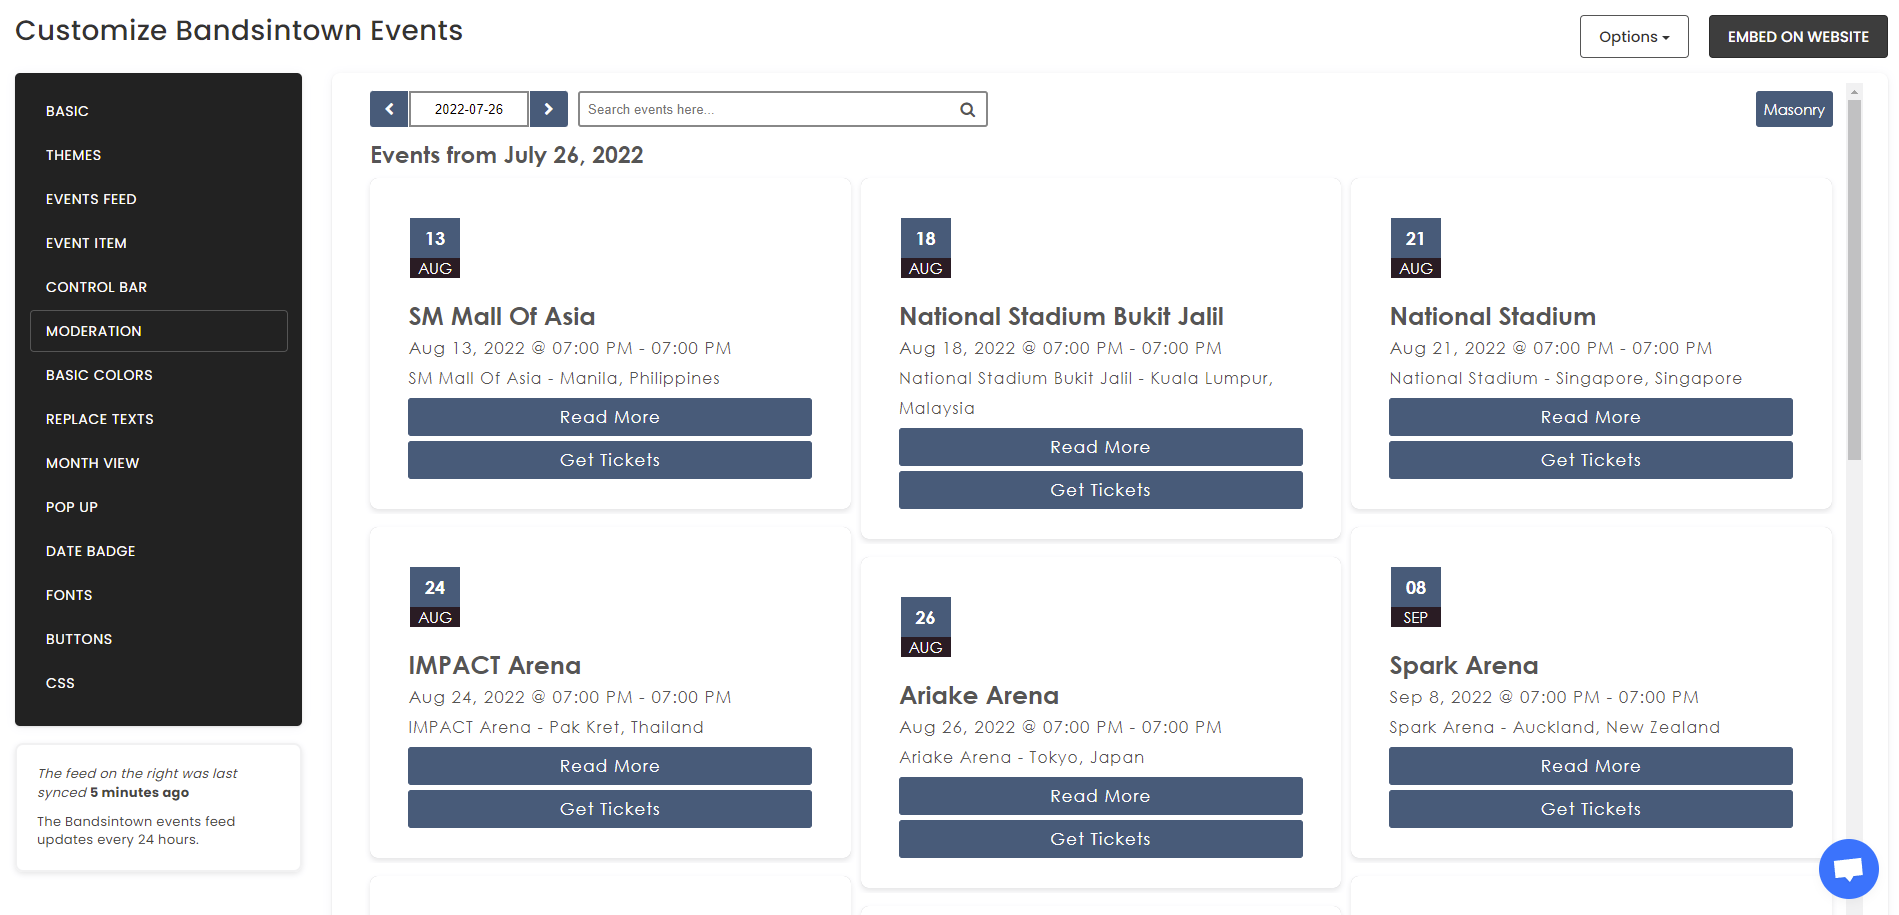 Customize your feed - How To Embed Bandsintown Events On Squarespace Website For Free?